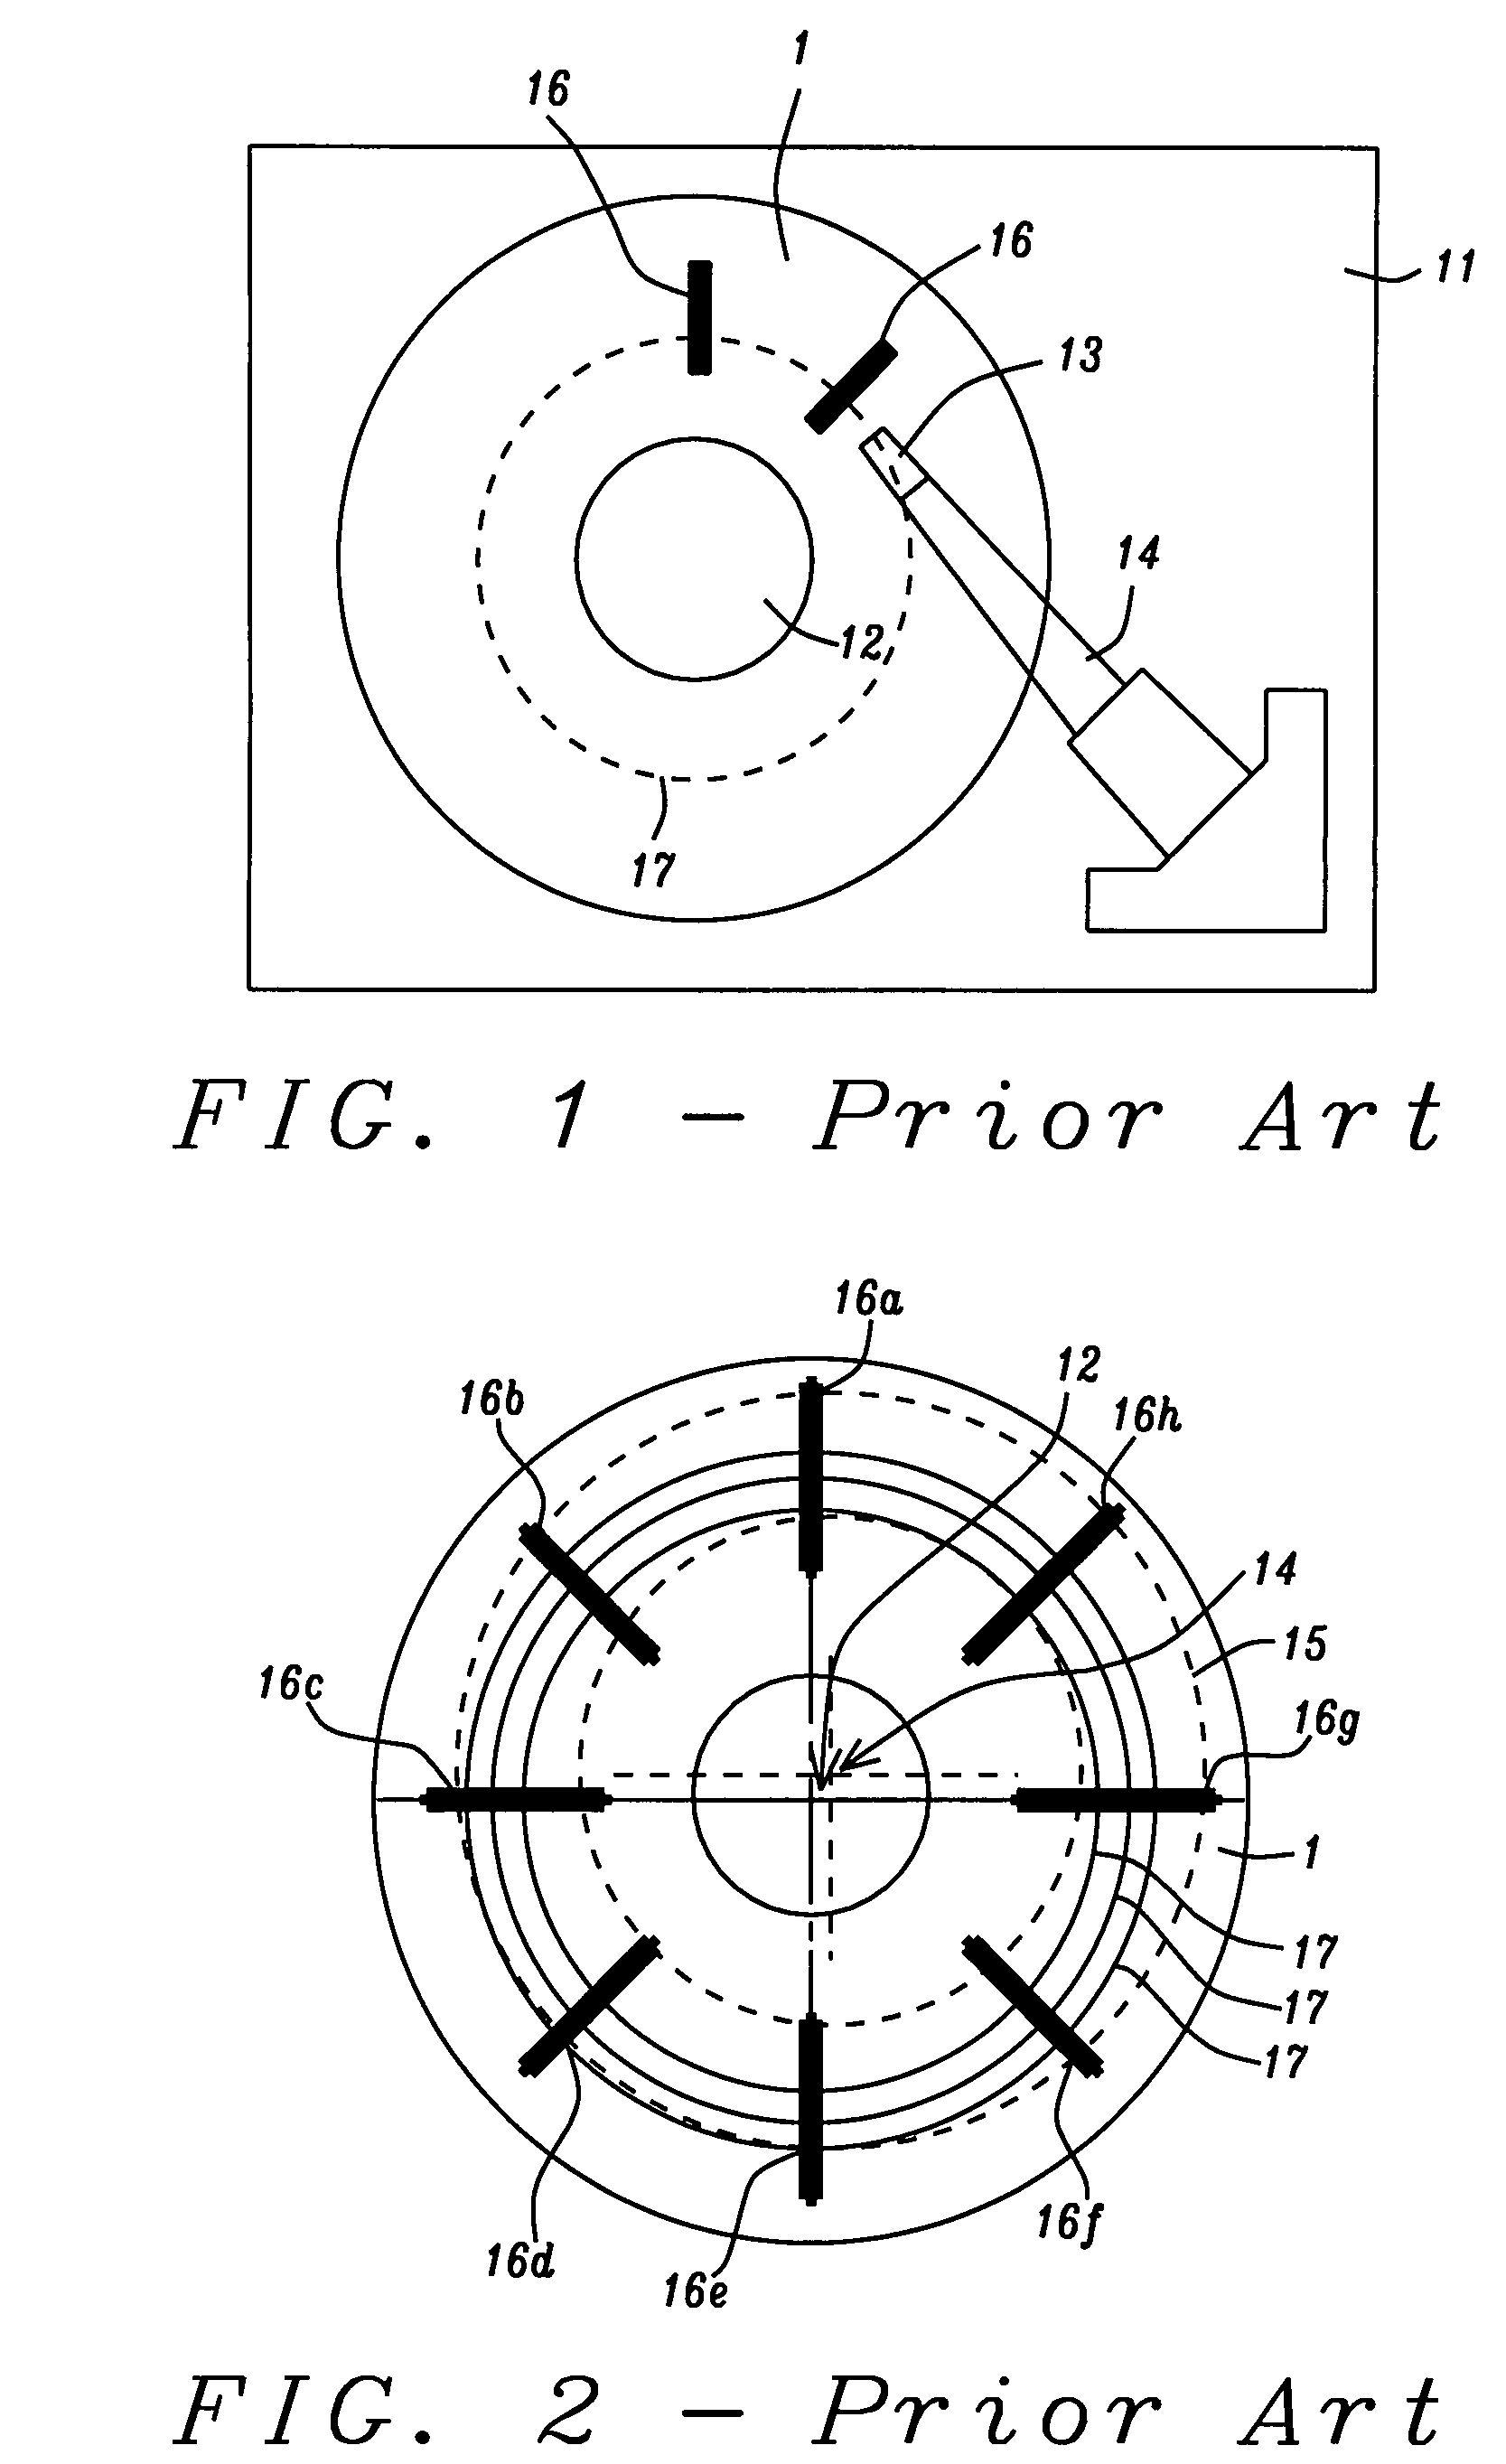 Feed-forward method for repeatable runout cancellation